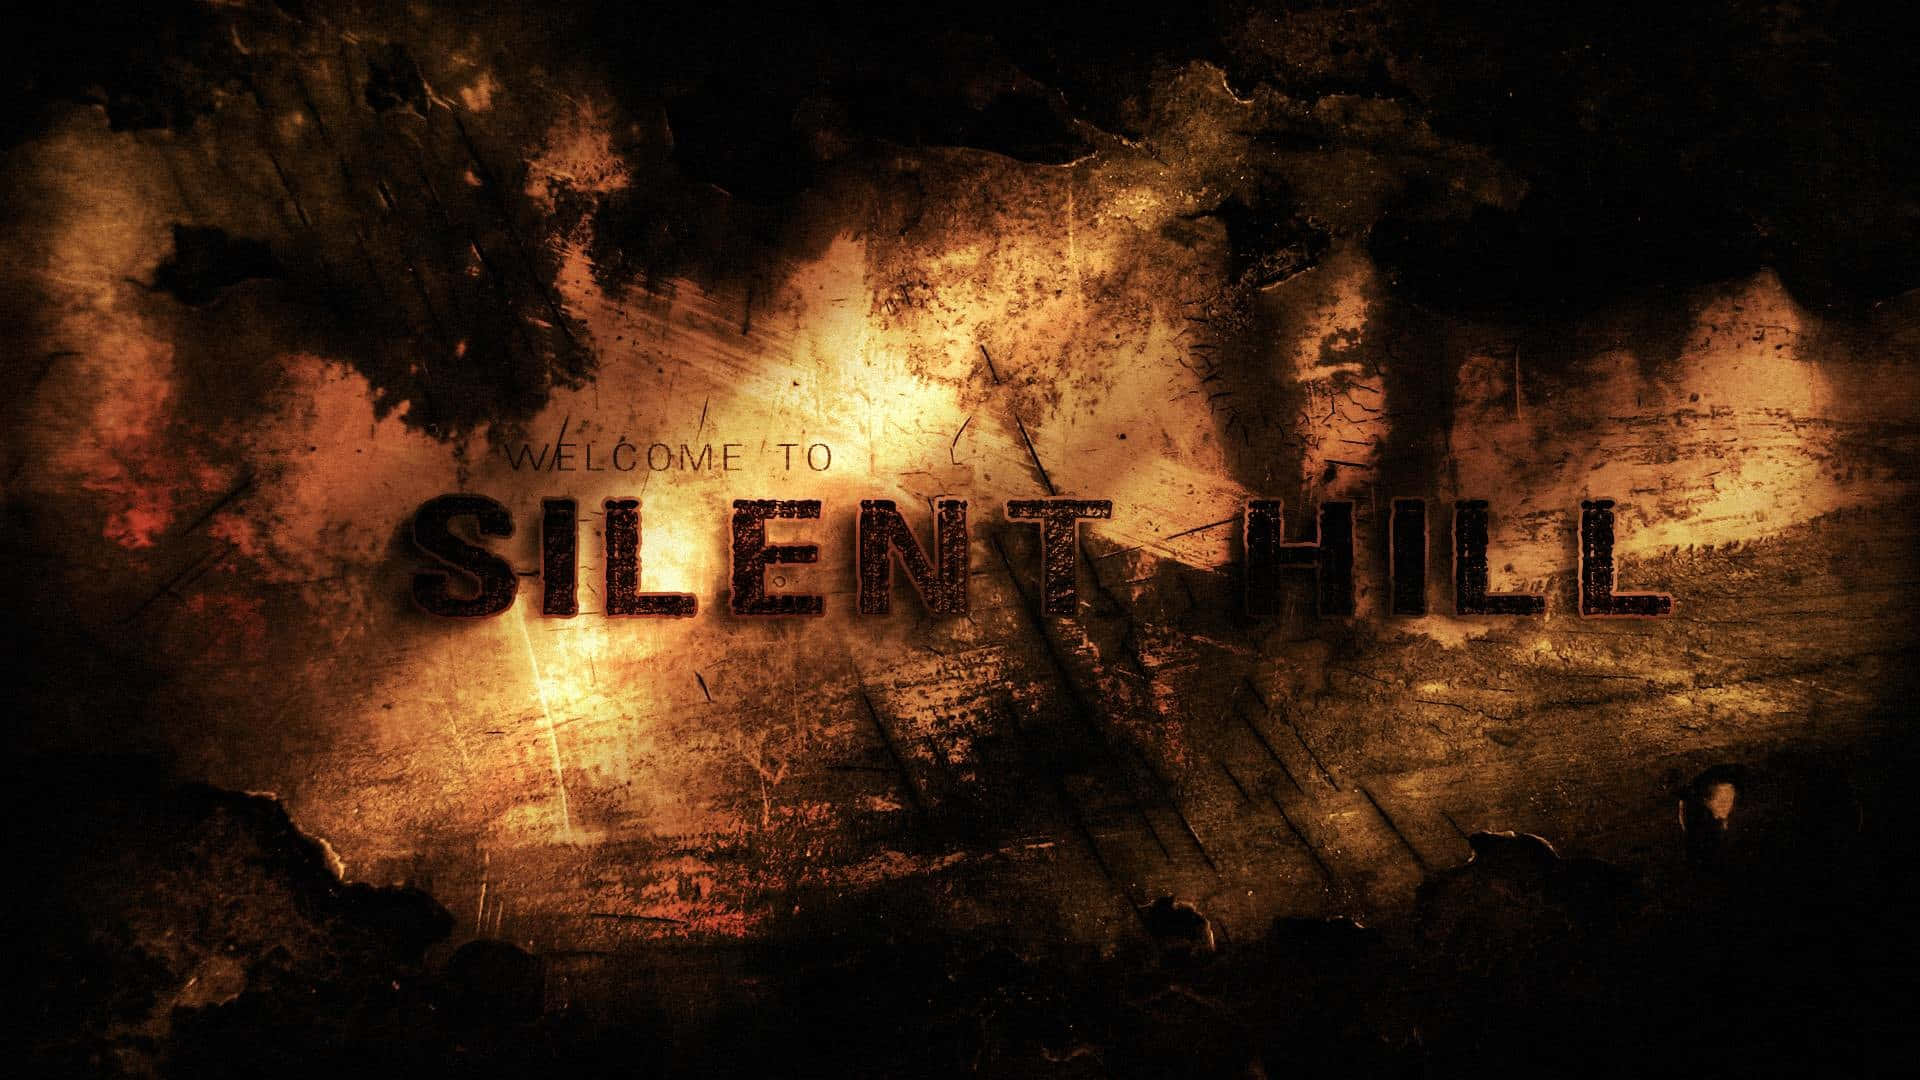 Journey Through The Shadowy and Spooky Town of Silent Hill